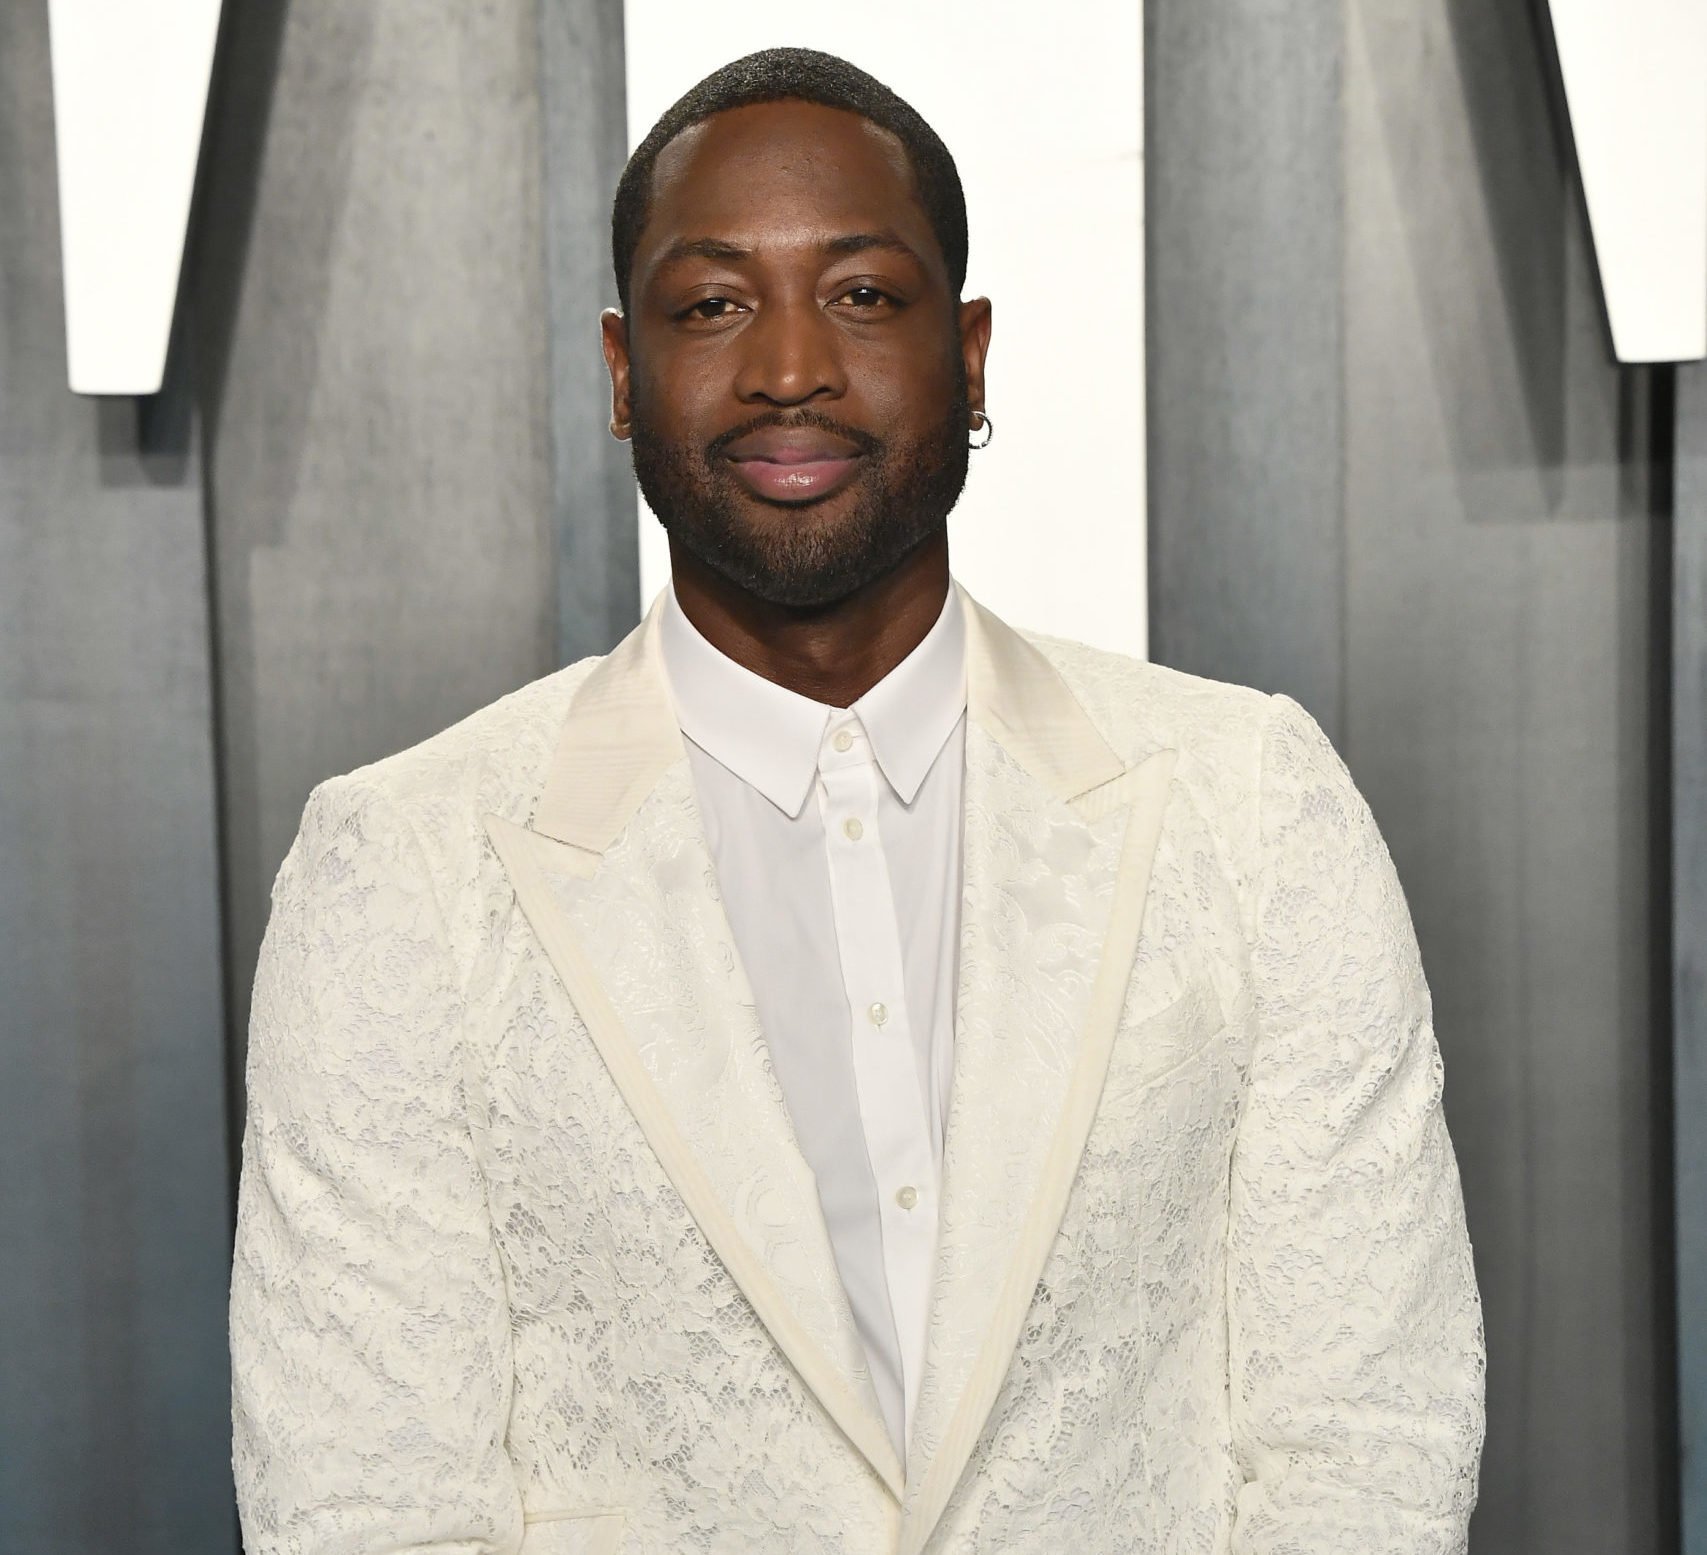 Dwyane Wade Opens up About Parenting & Sparking Change Through The Lessons He Has Learned